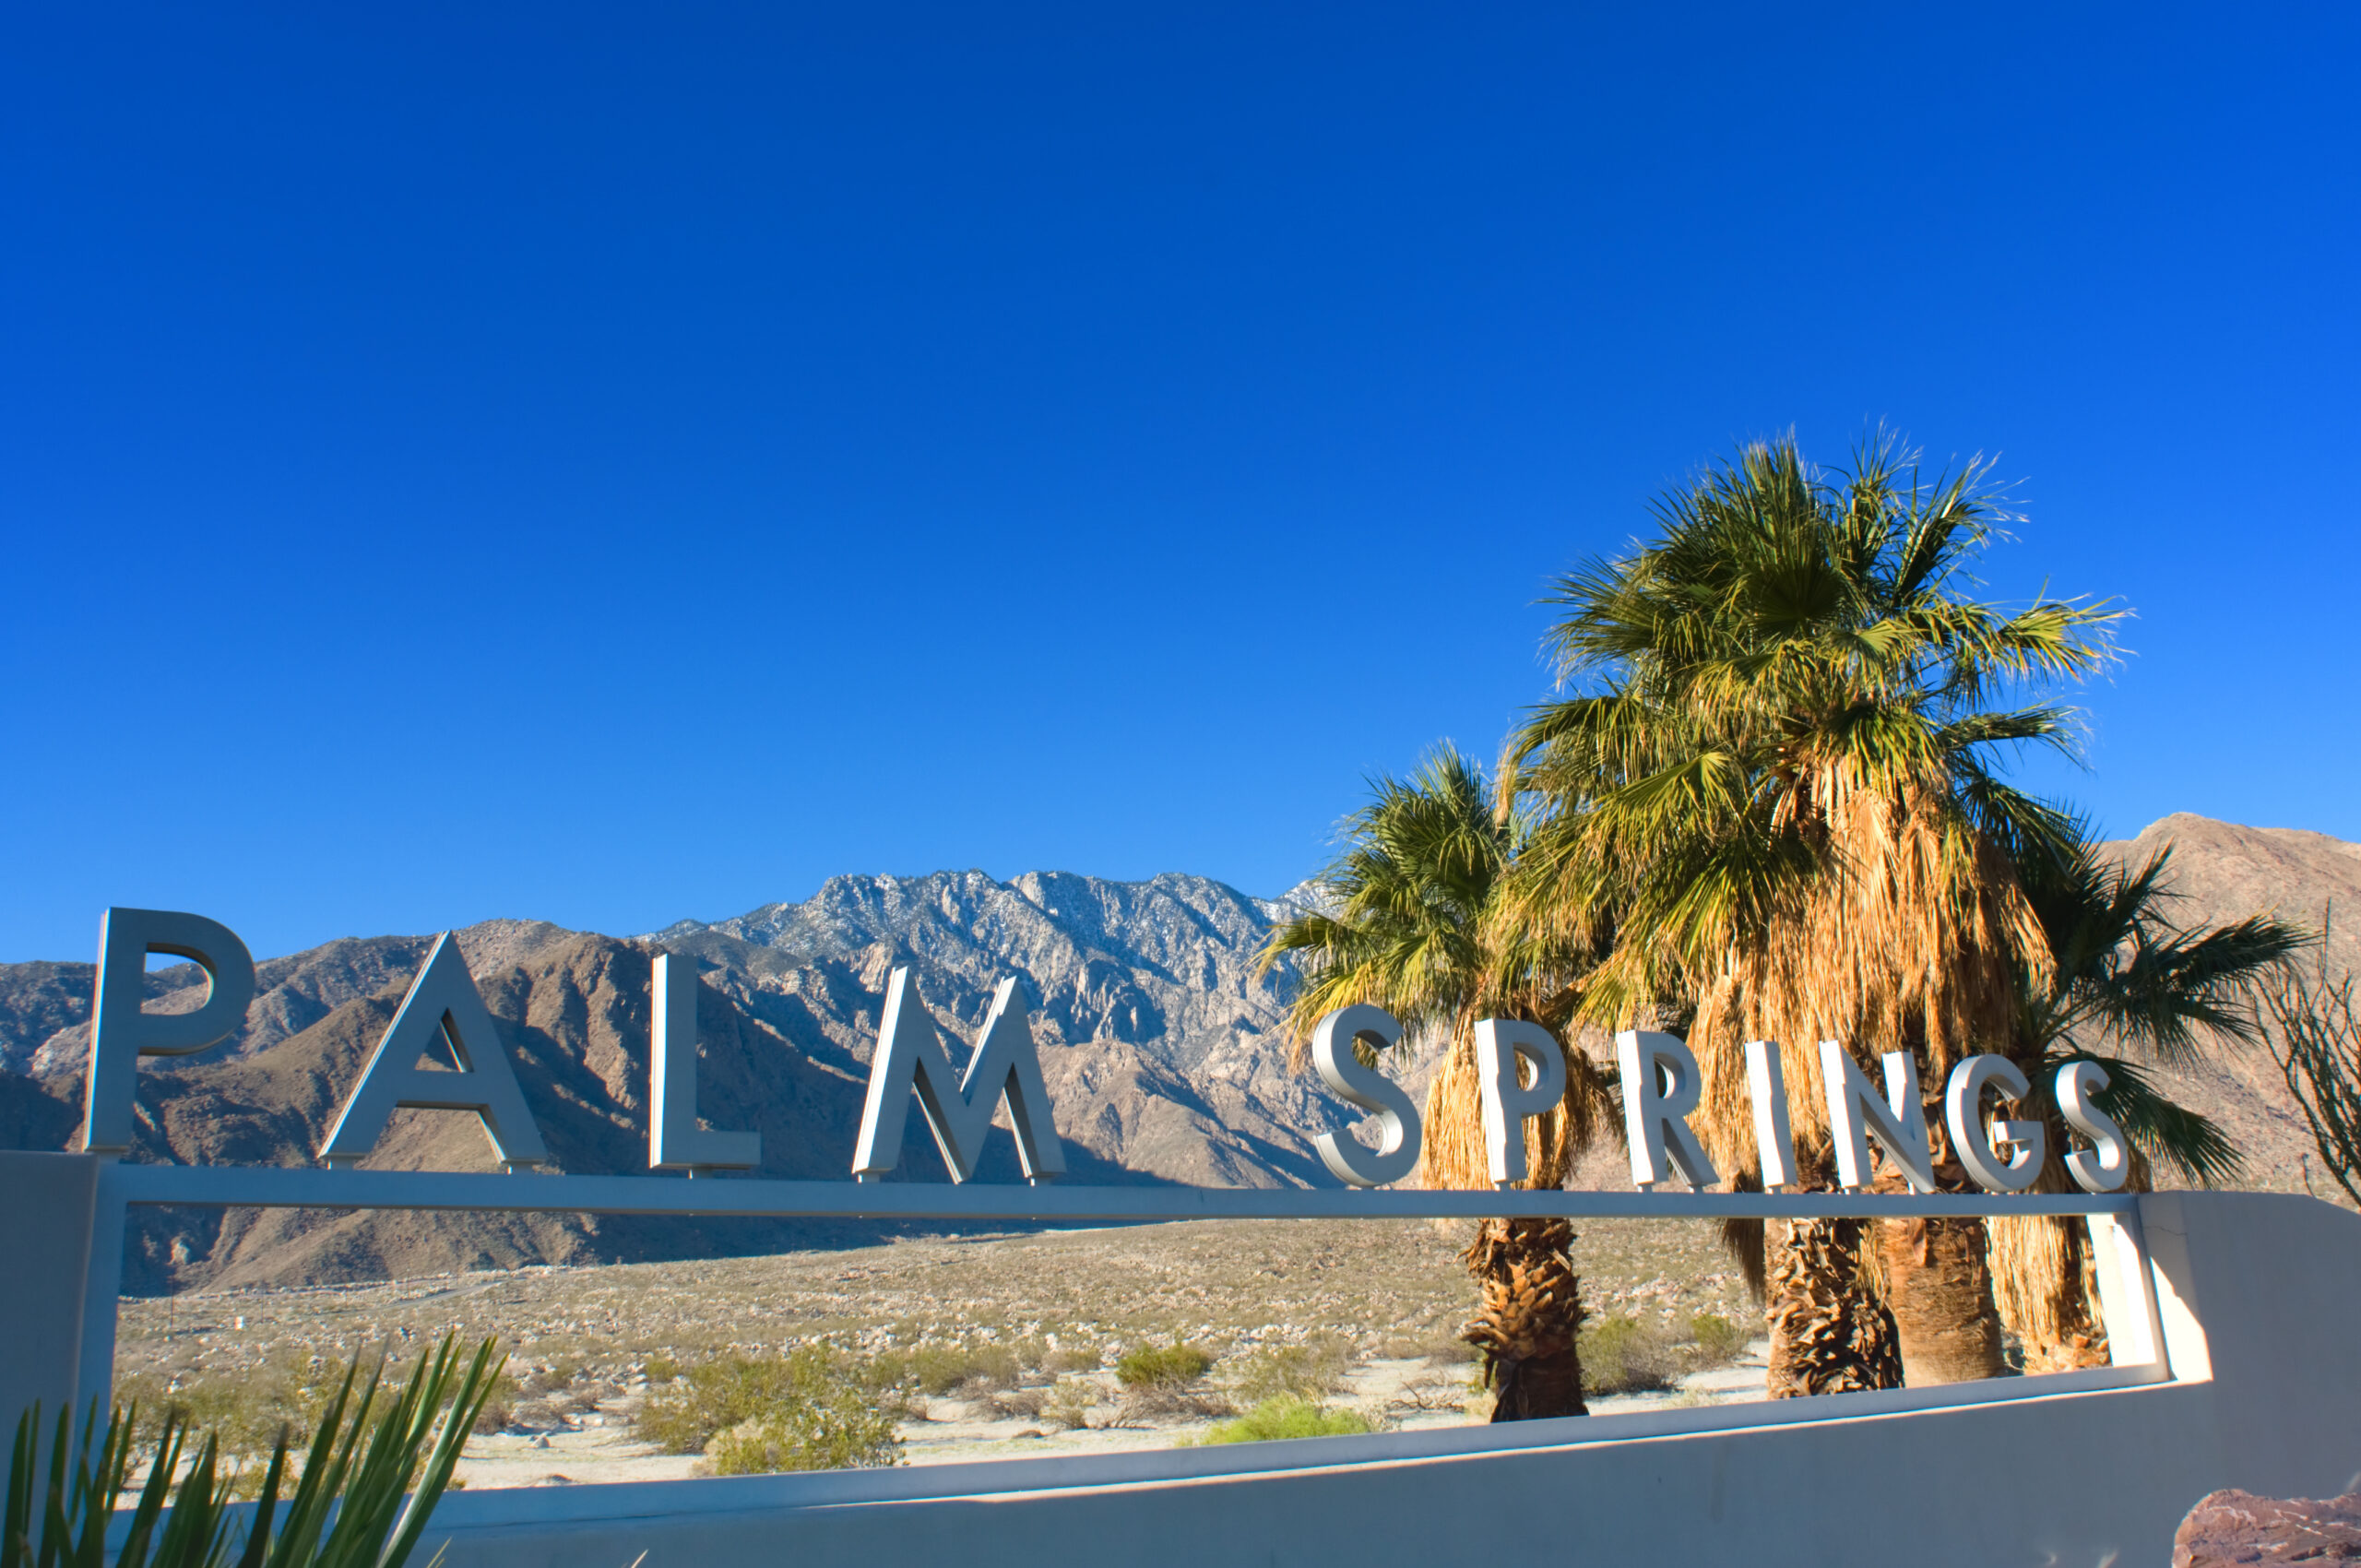 Best Coast Law Opens in Palm Springs California